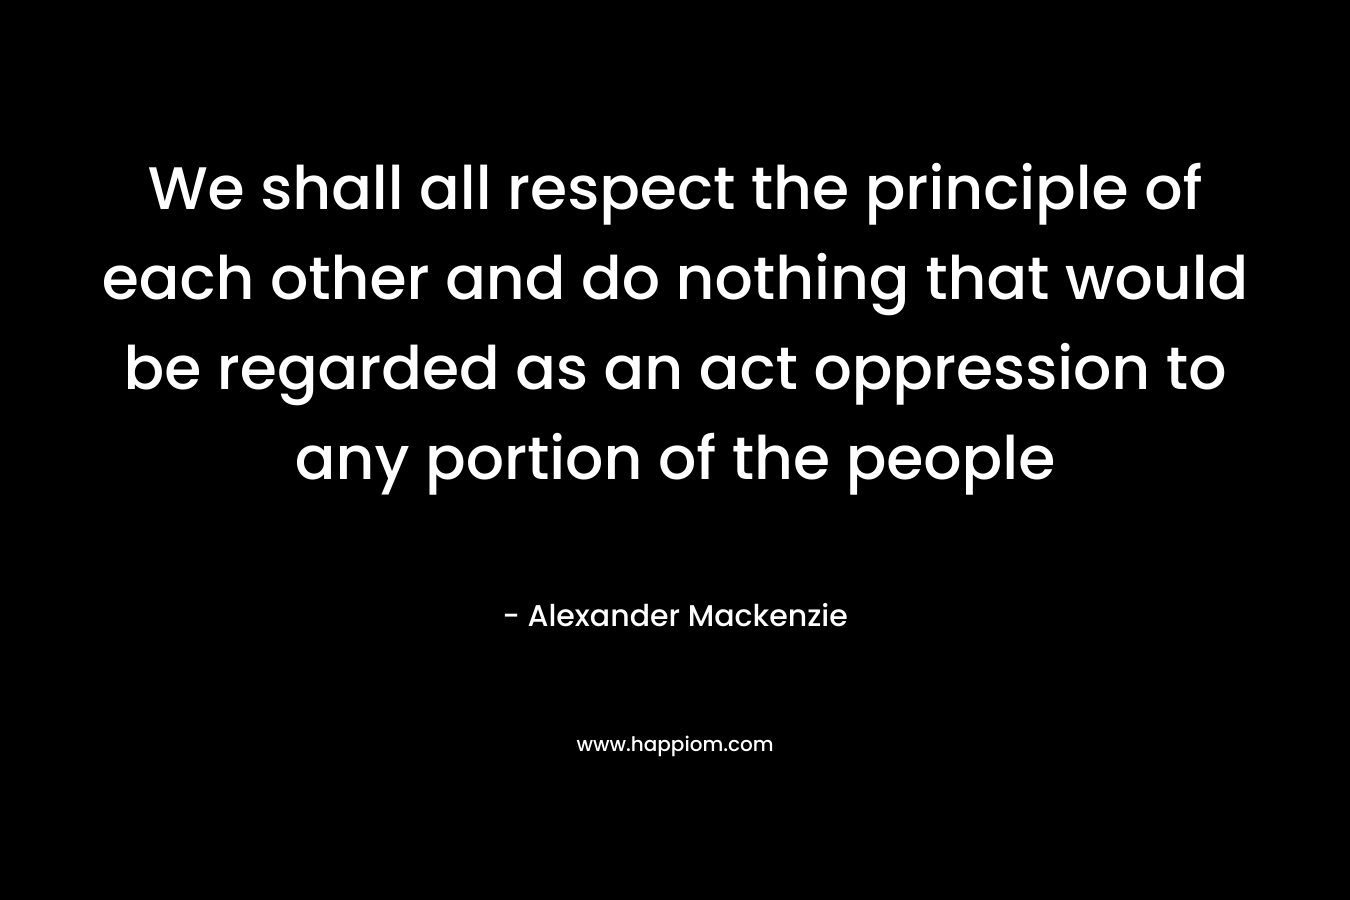 We shall all respect the principle of each other and do nothing that would be regarded as an act oppression to any portion of the people